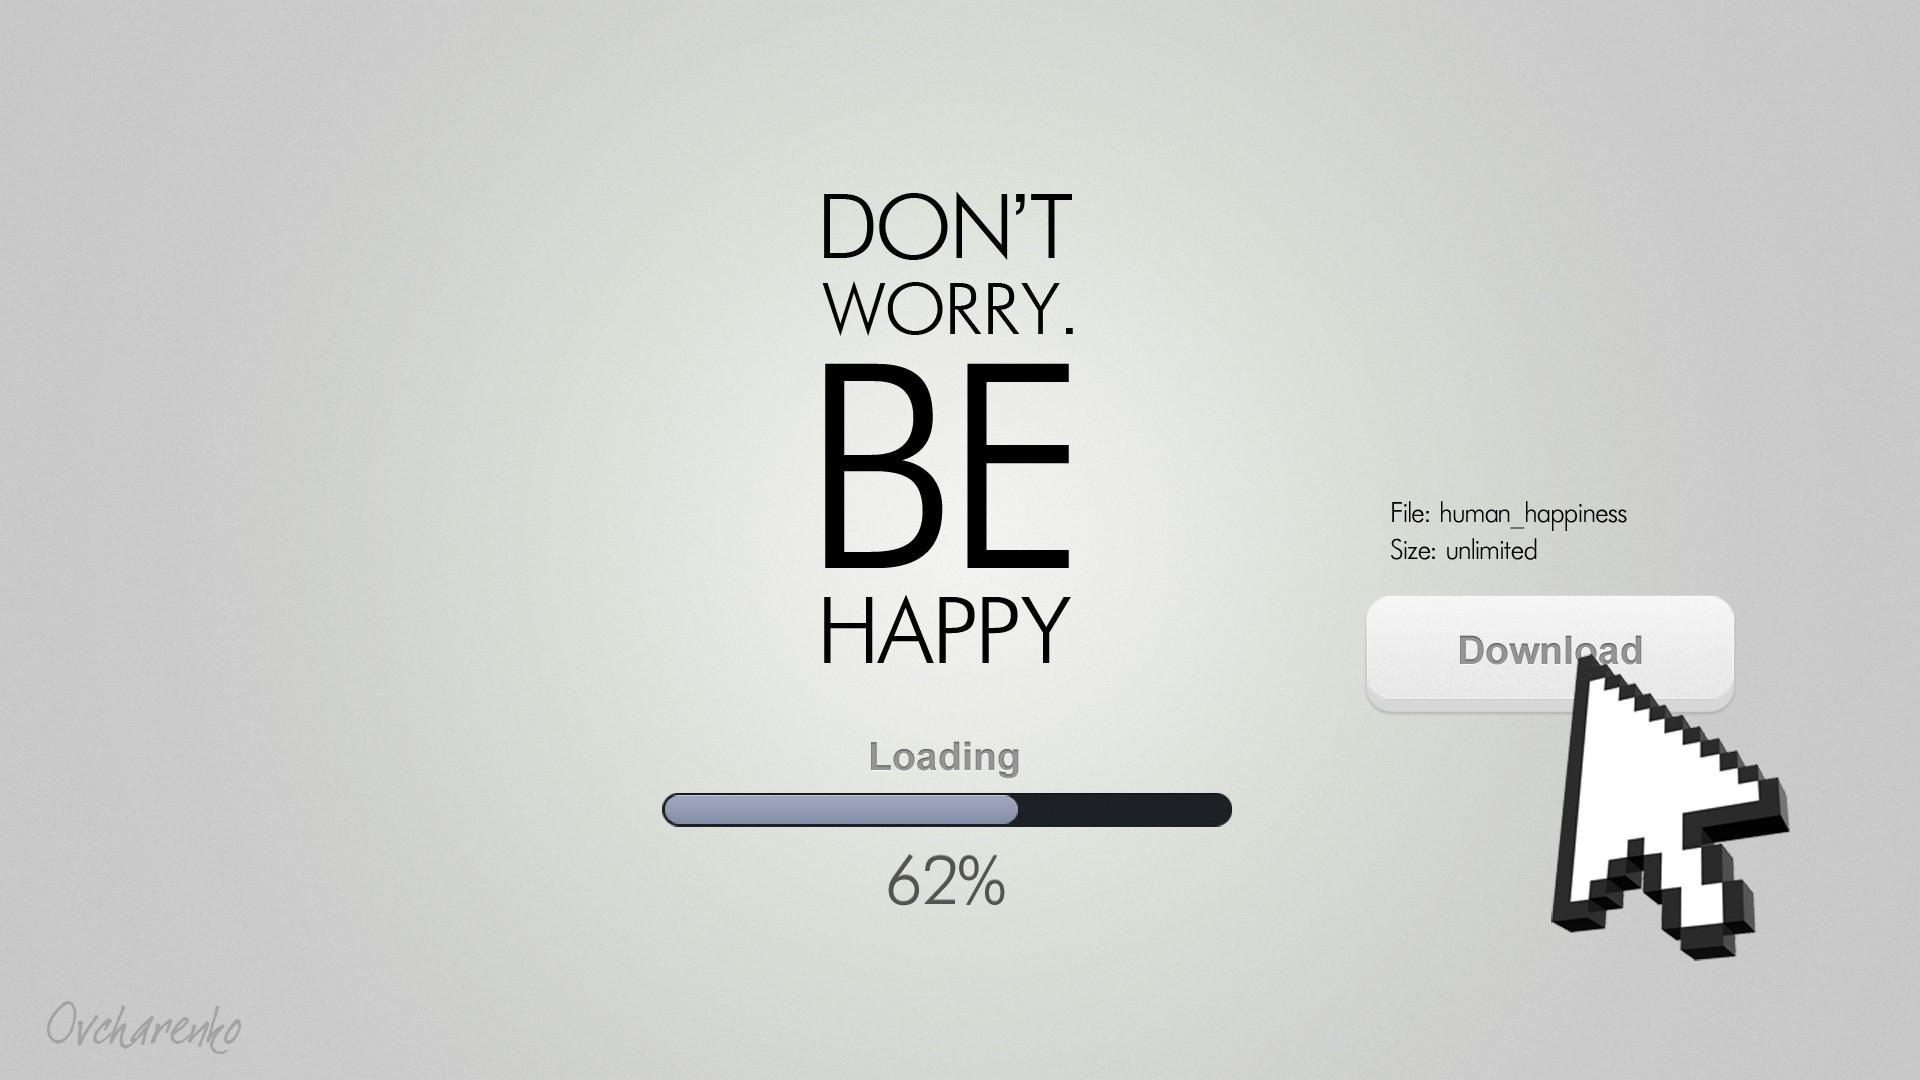 Don't worry be happy desktop PC and Mac wallpaper